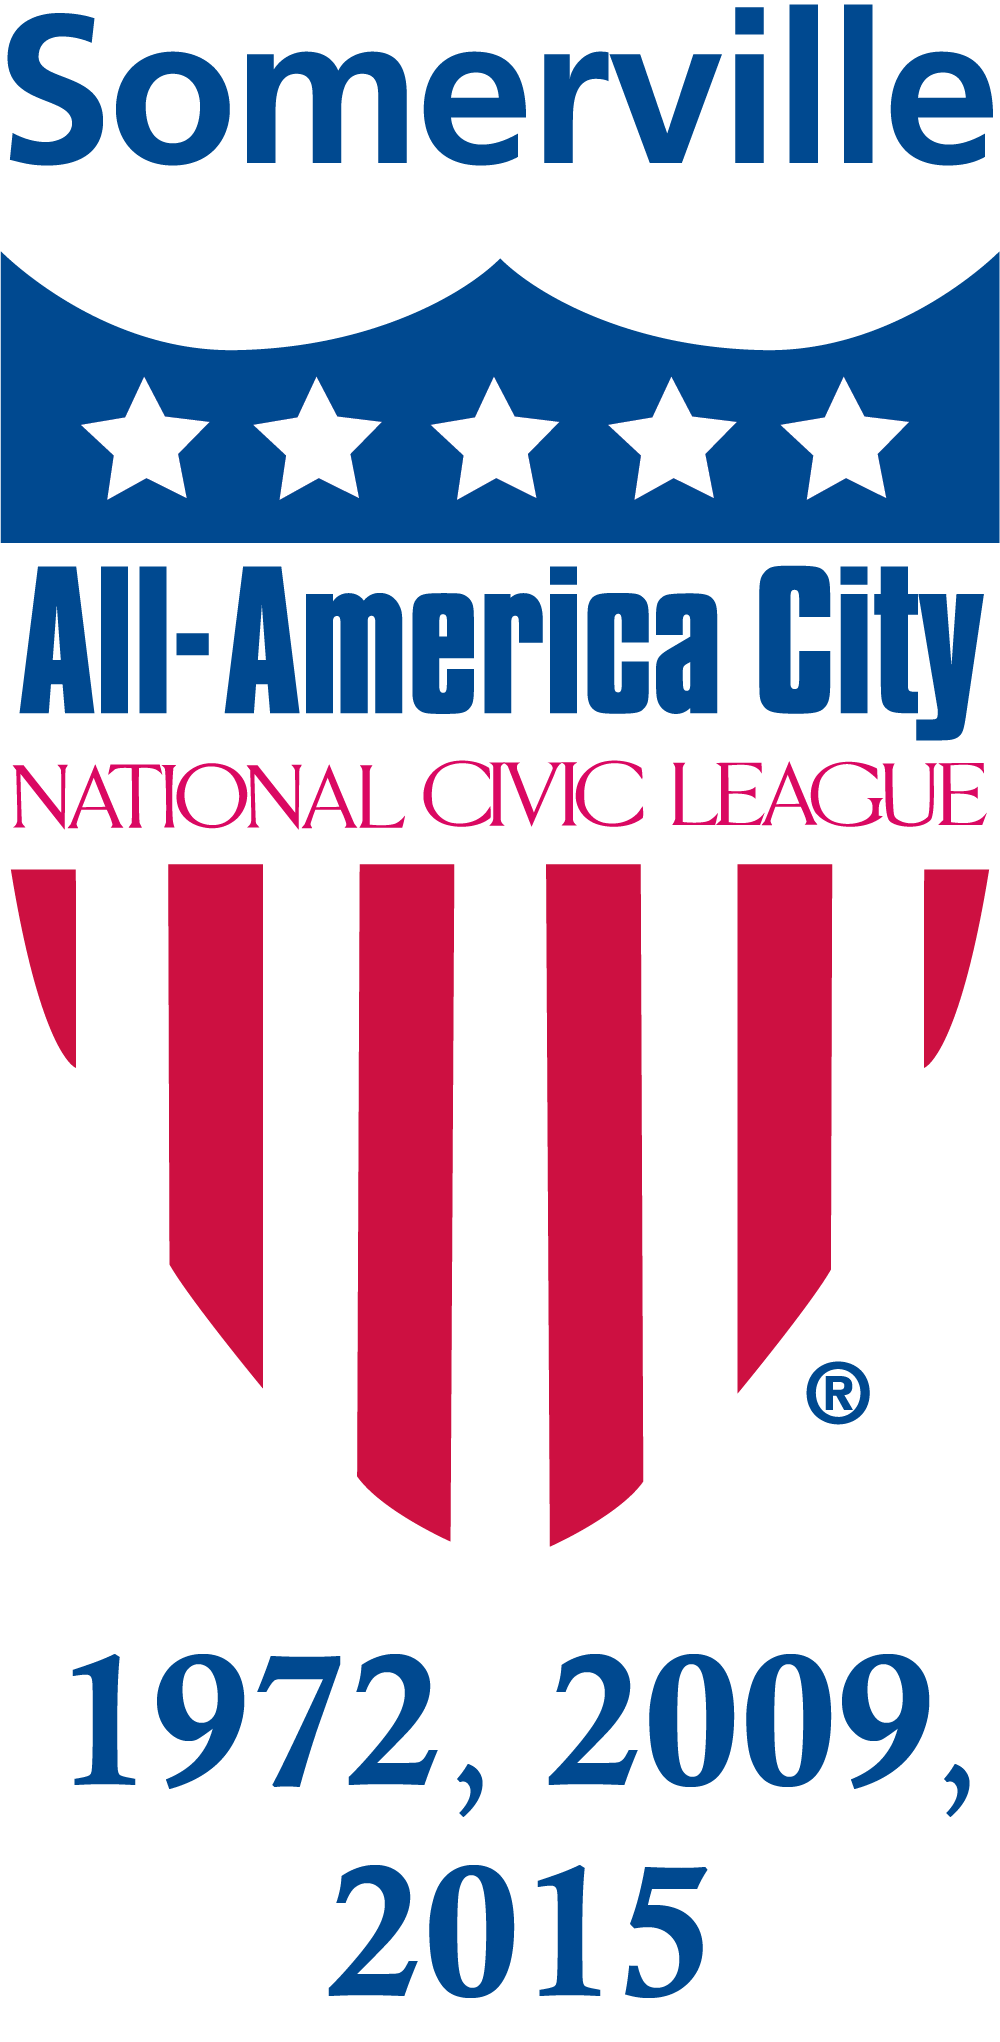 All-America City Award - National Civic League: The City of Somerville (1972, 2009, 2015)